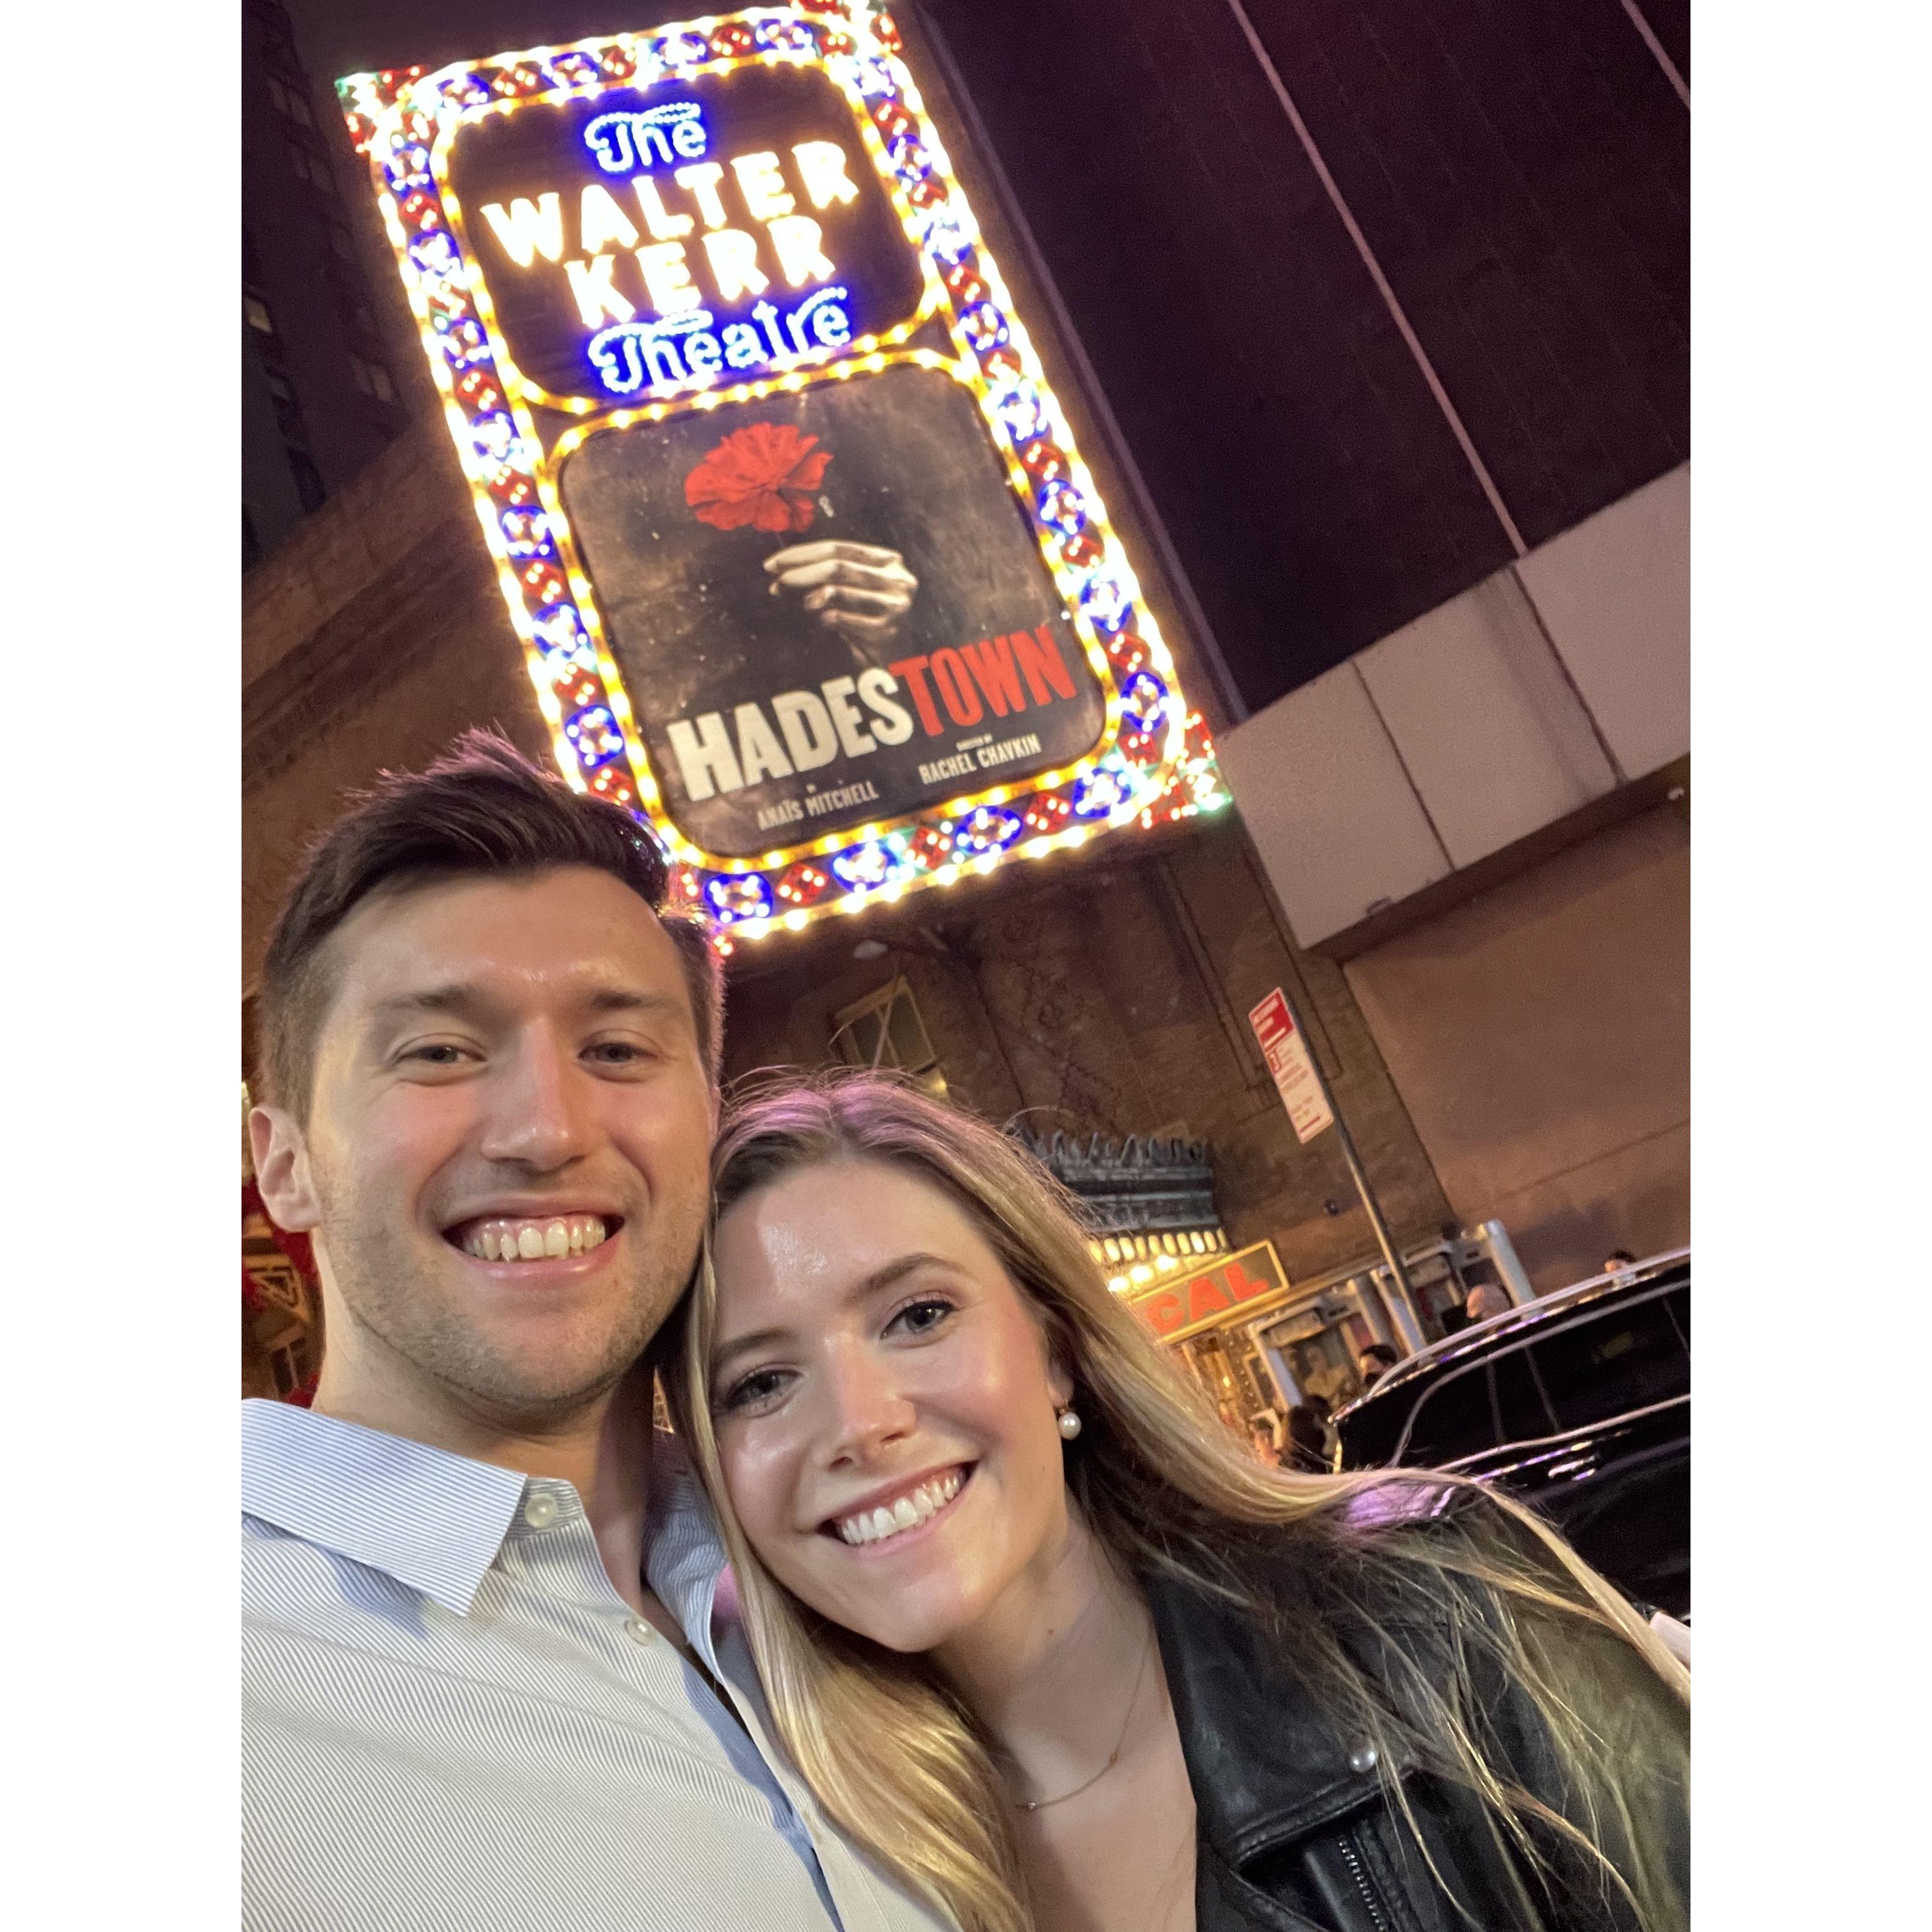 Night before our engagement seeing Hadestown - New York, NY 2022